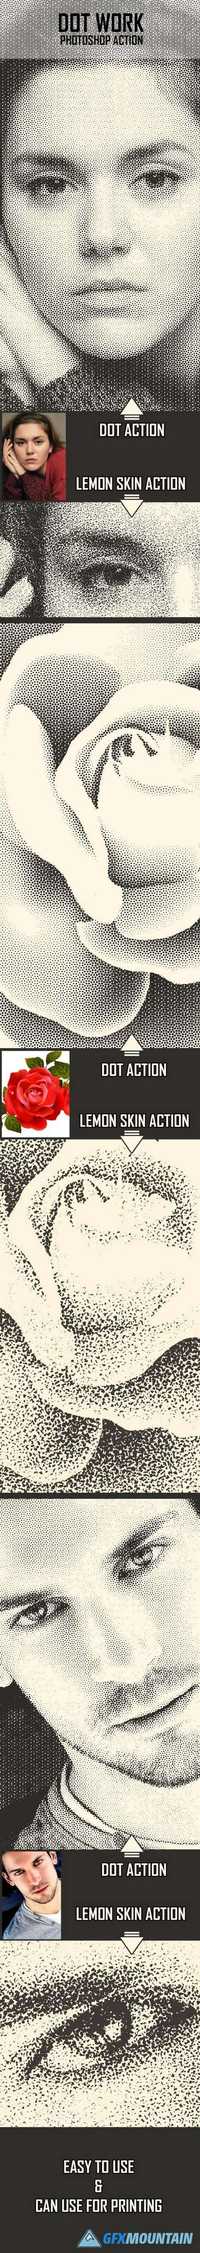 GraphicRiver - Dot Work Photoshop Action 16152283